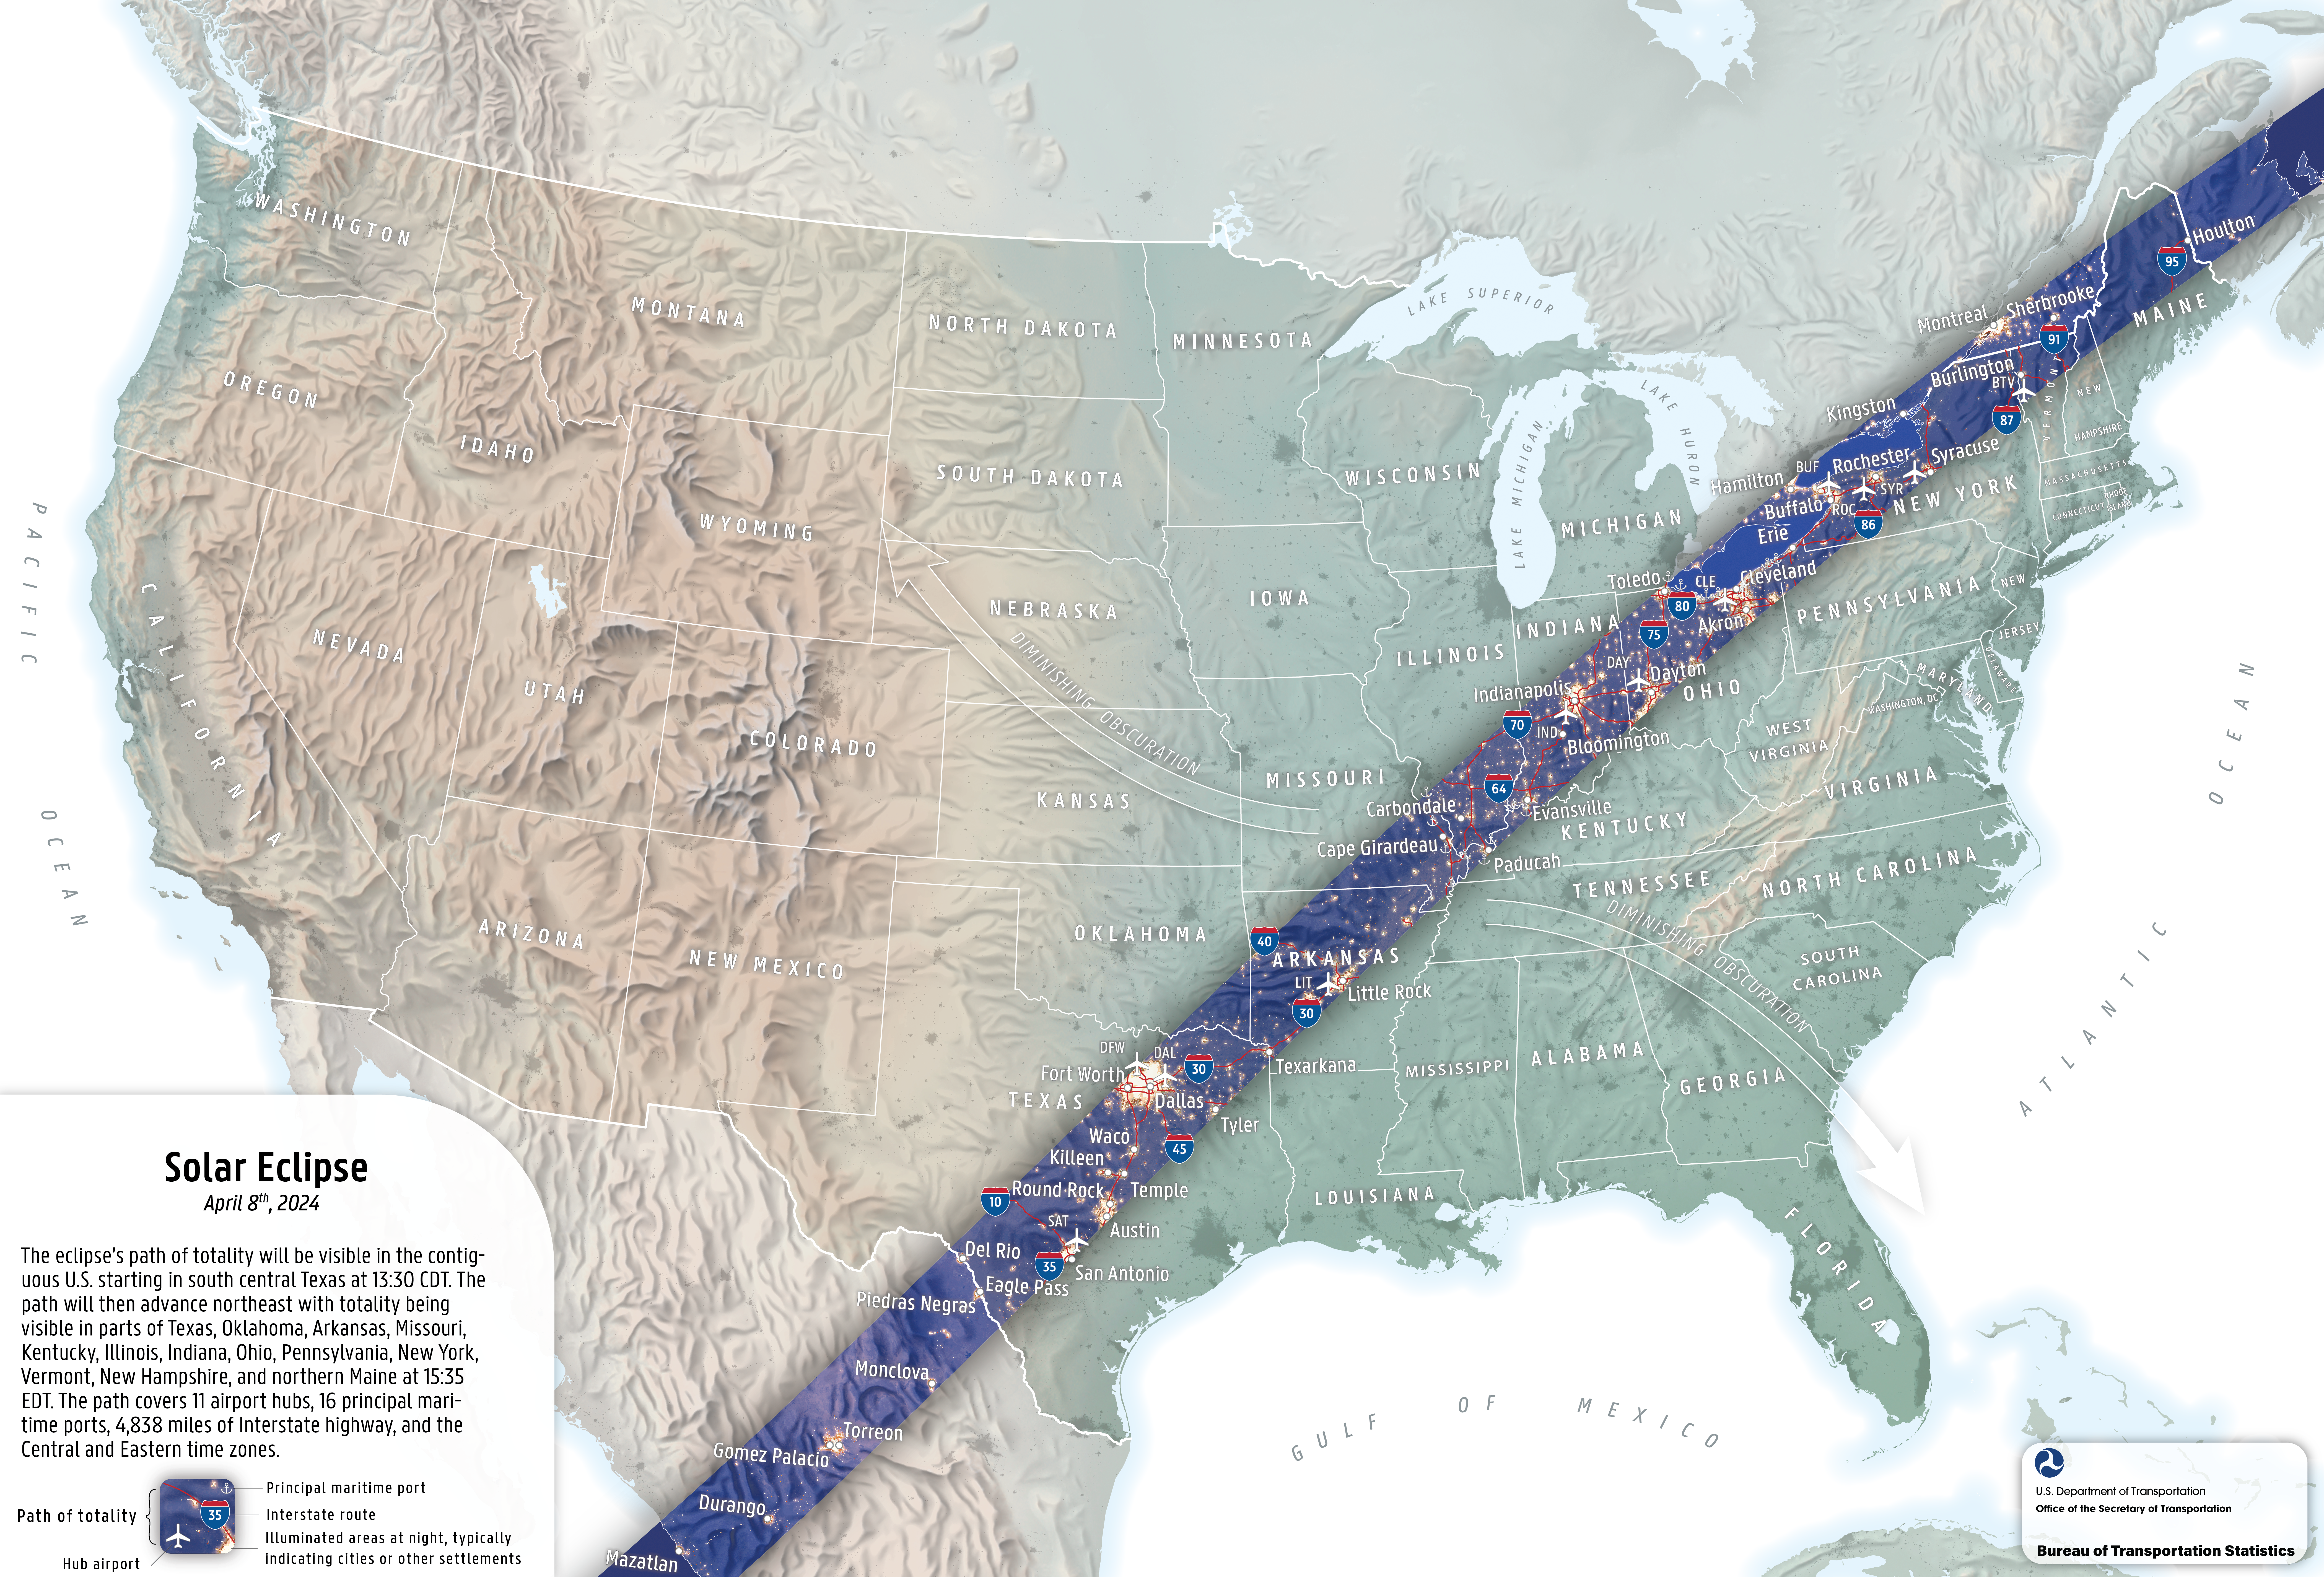 The solar eclipse’s path of totality on April 8th, 2024